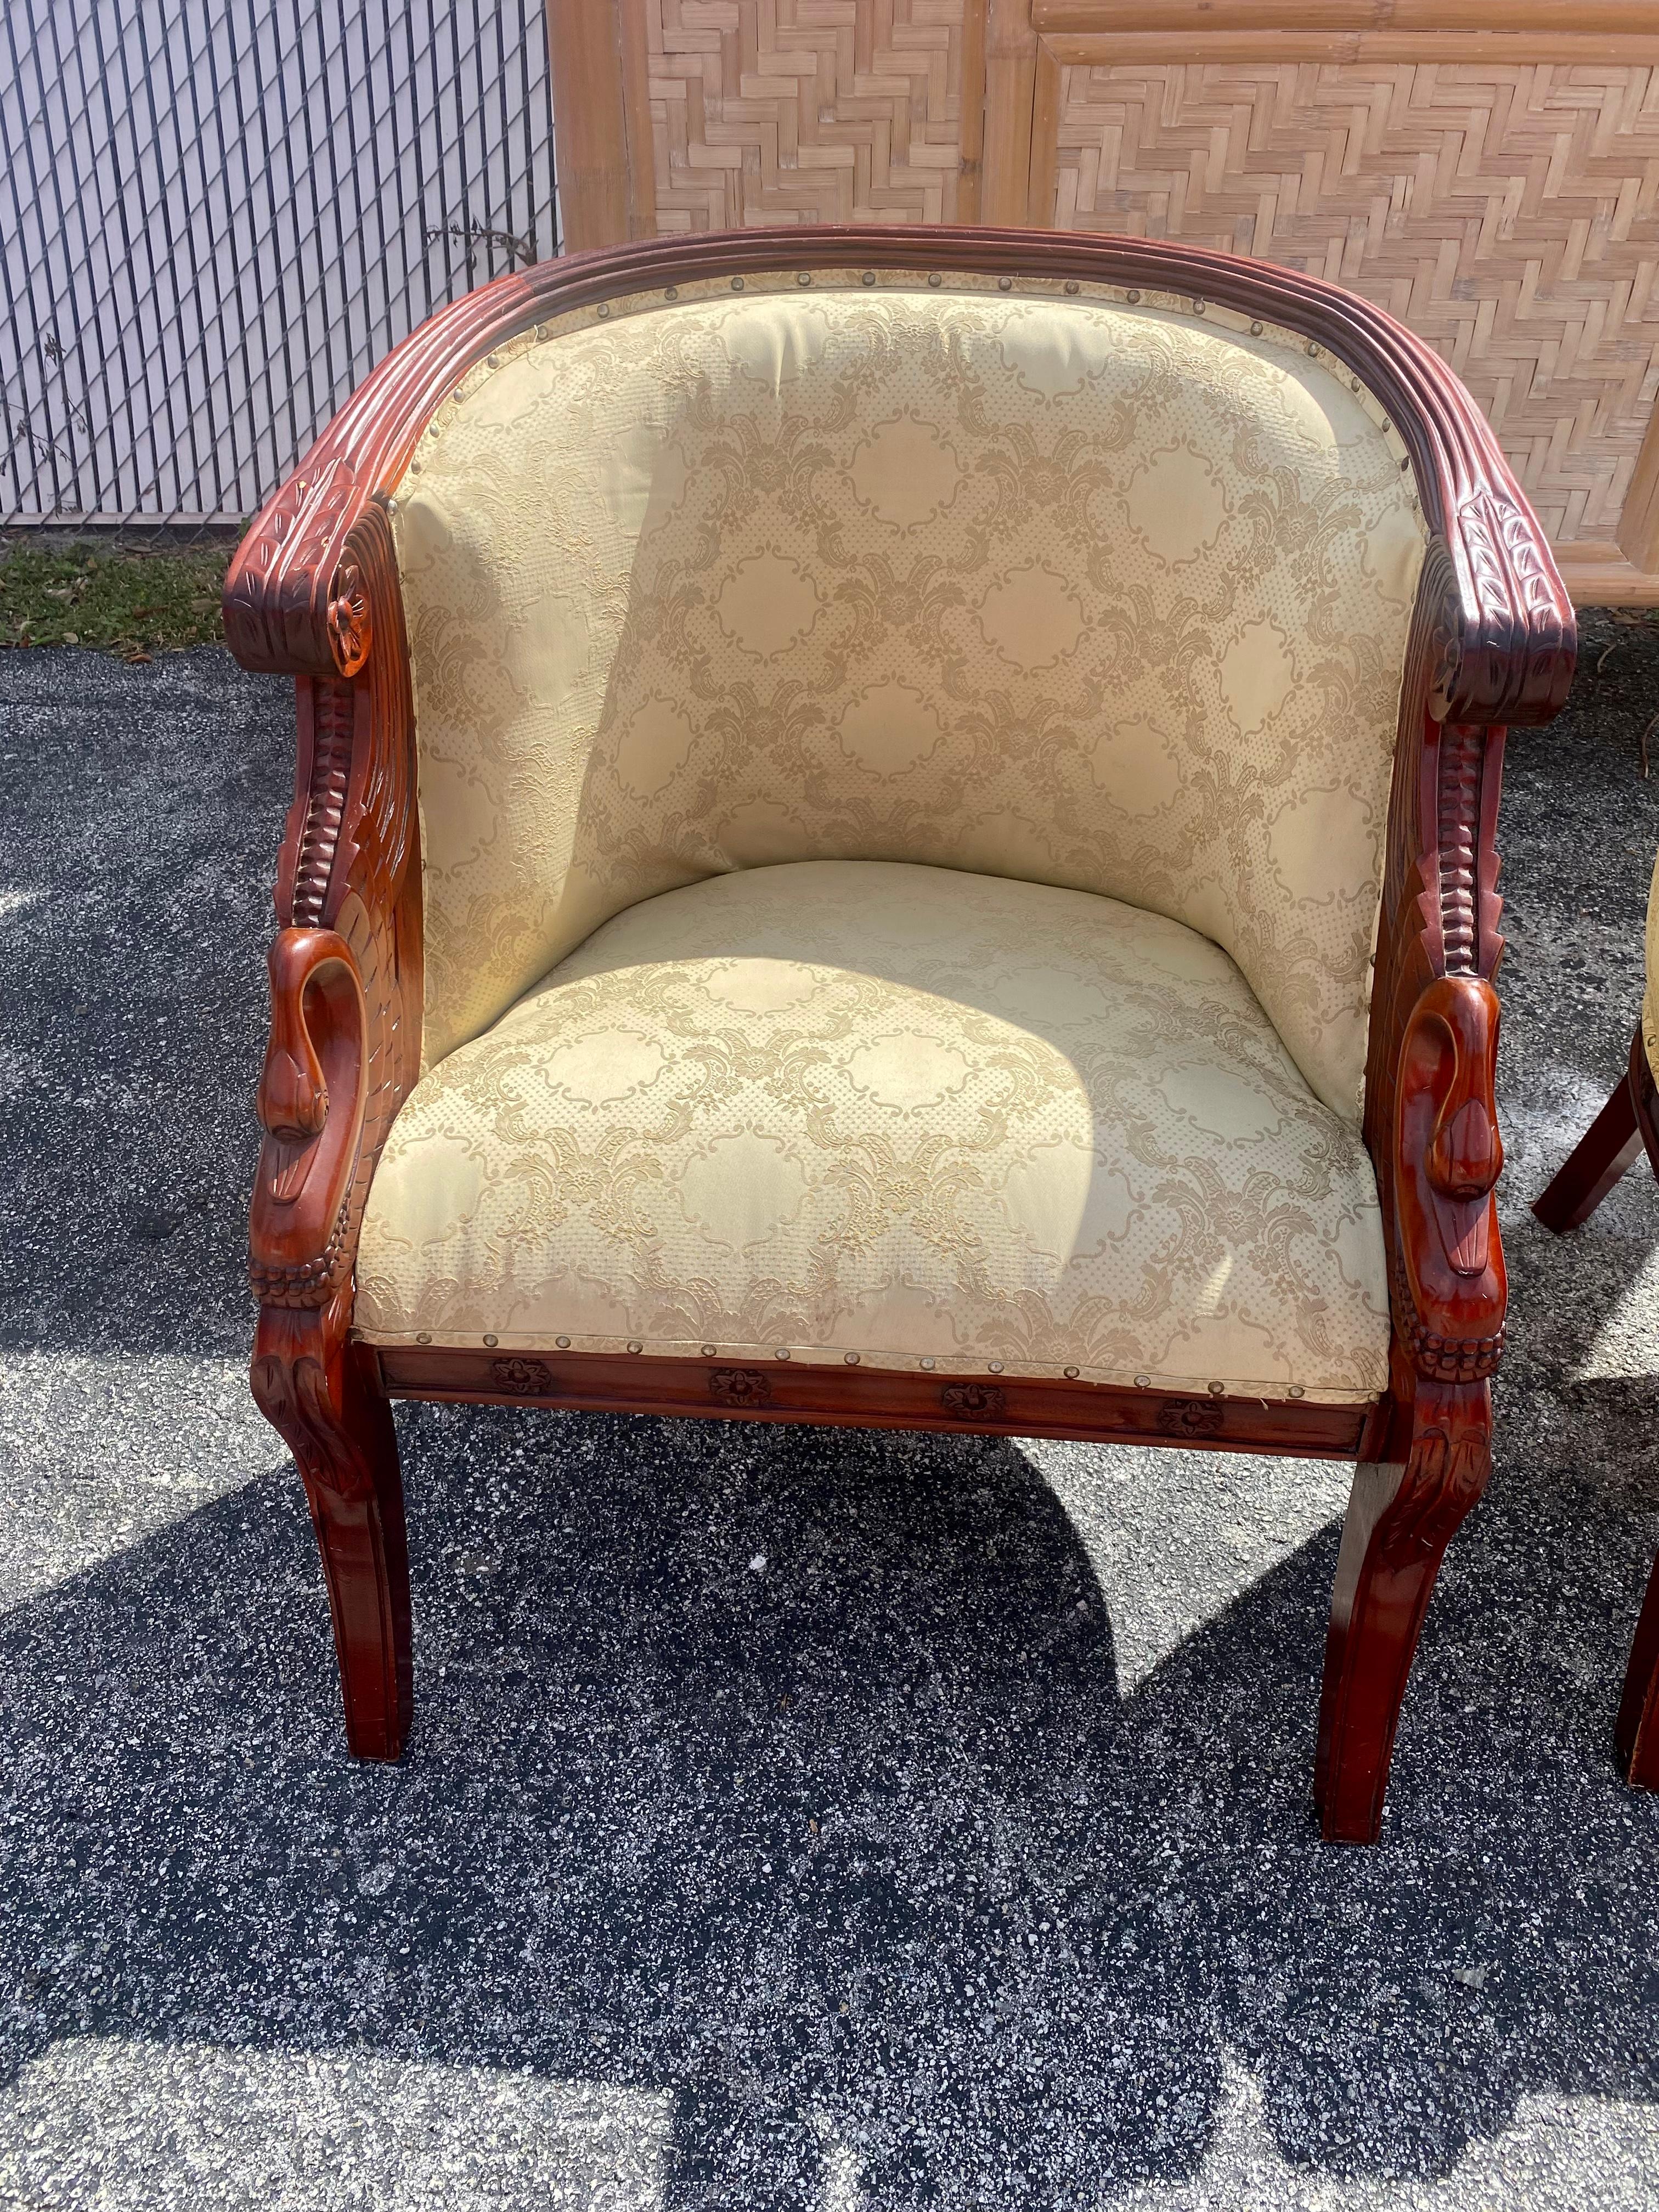 1940s Carved Gilt Wood Swan Barrel Chairs, Set of 2 For Sale 3